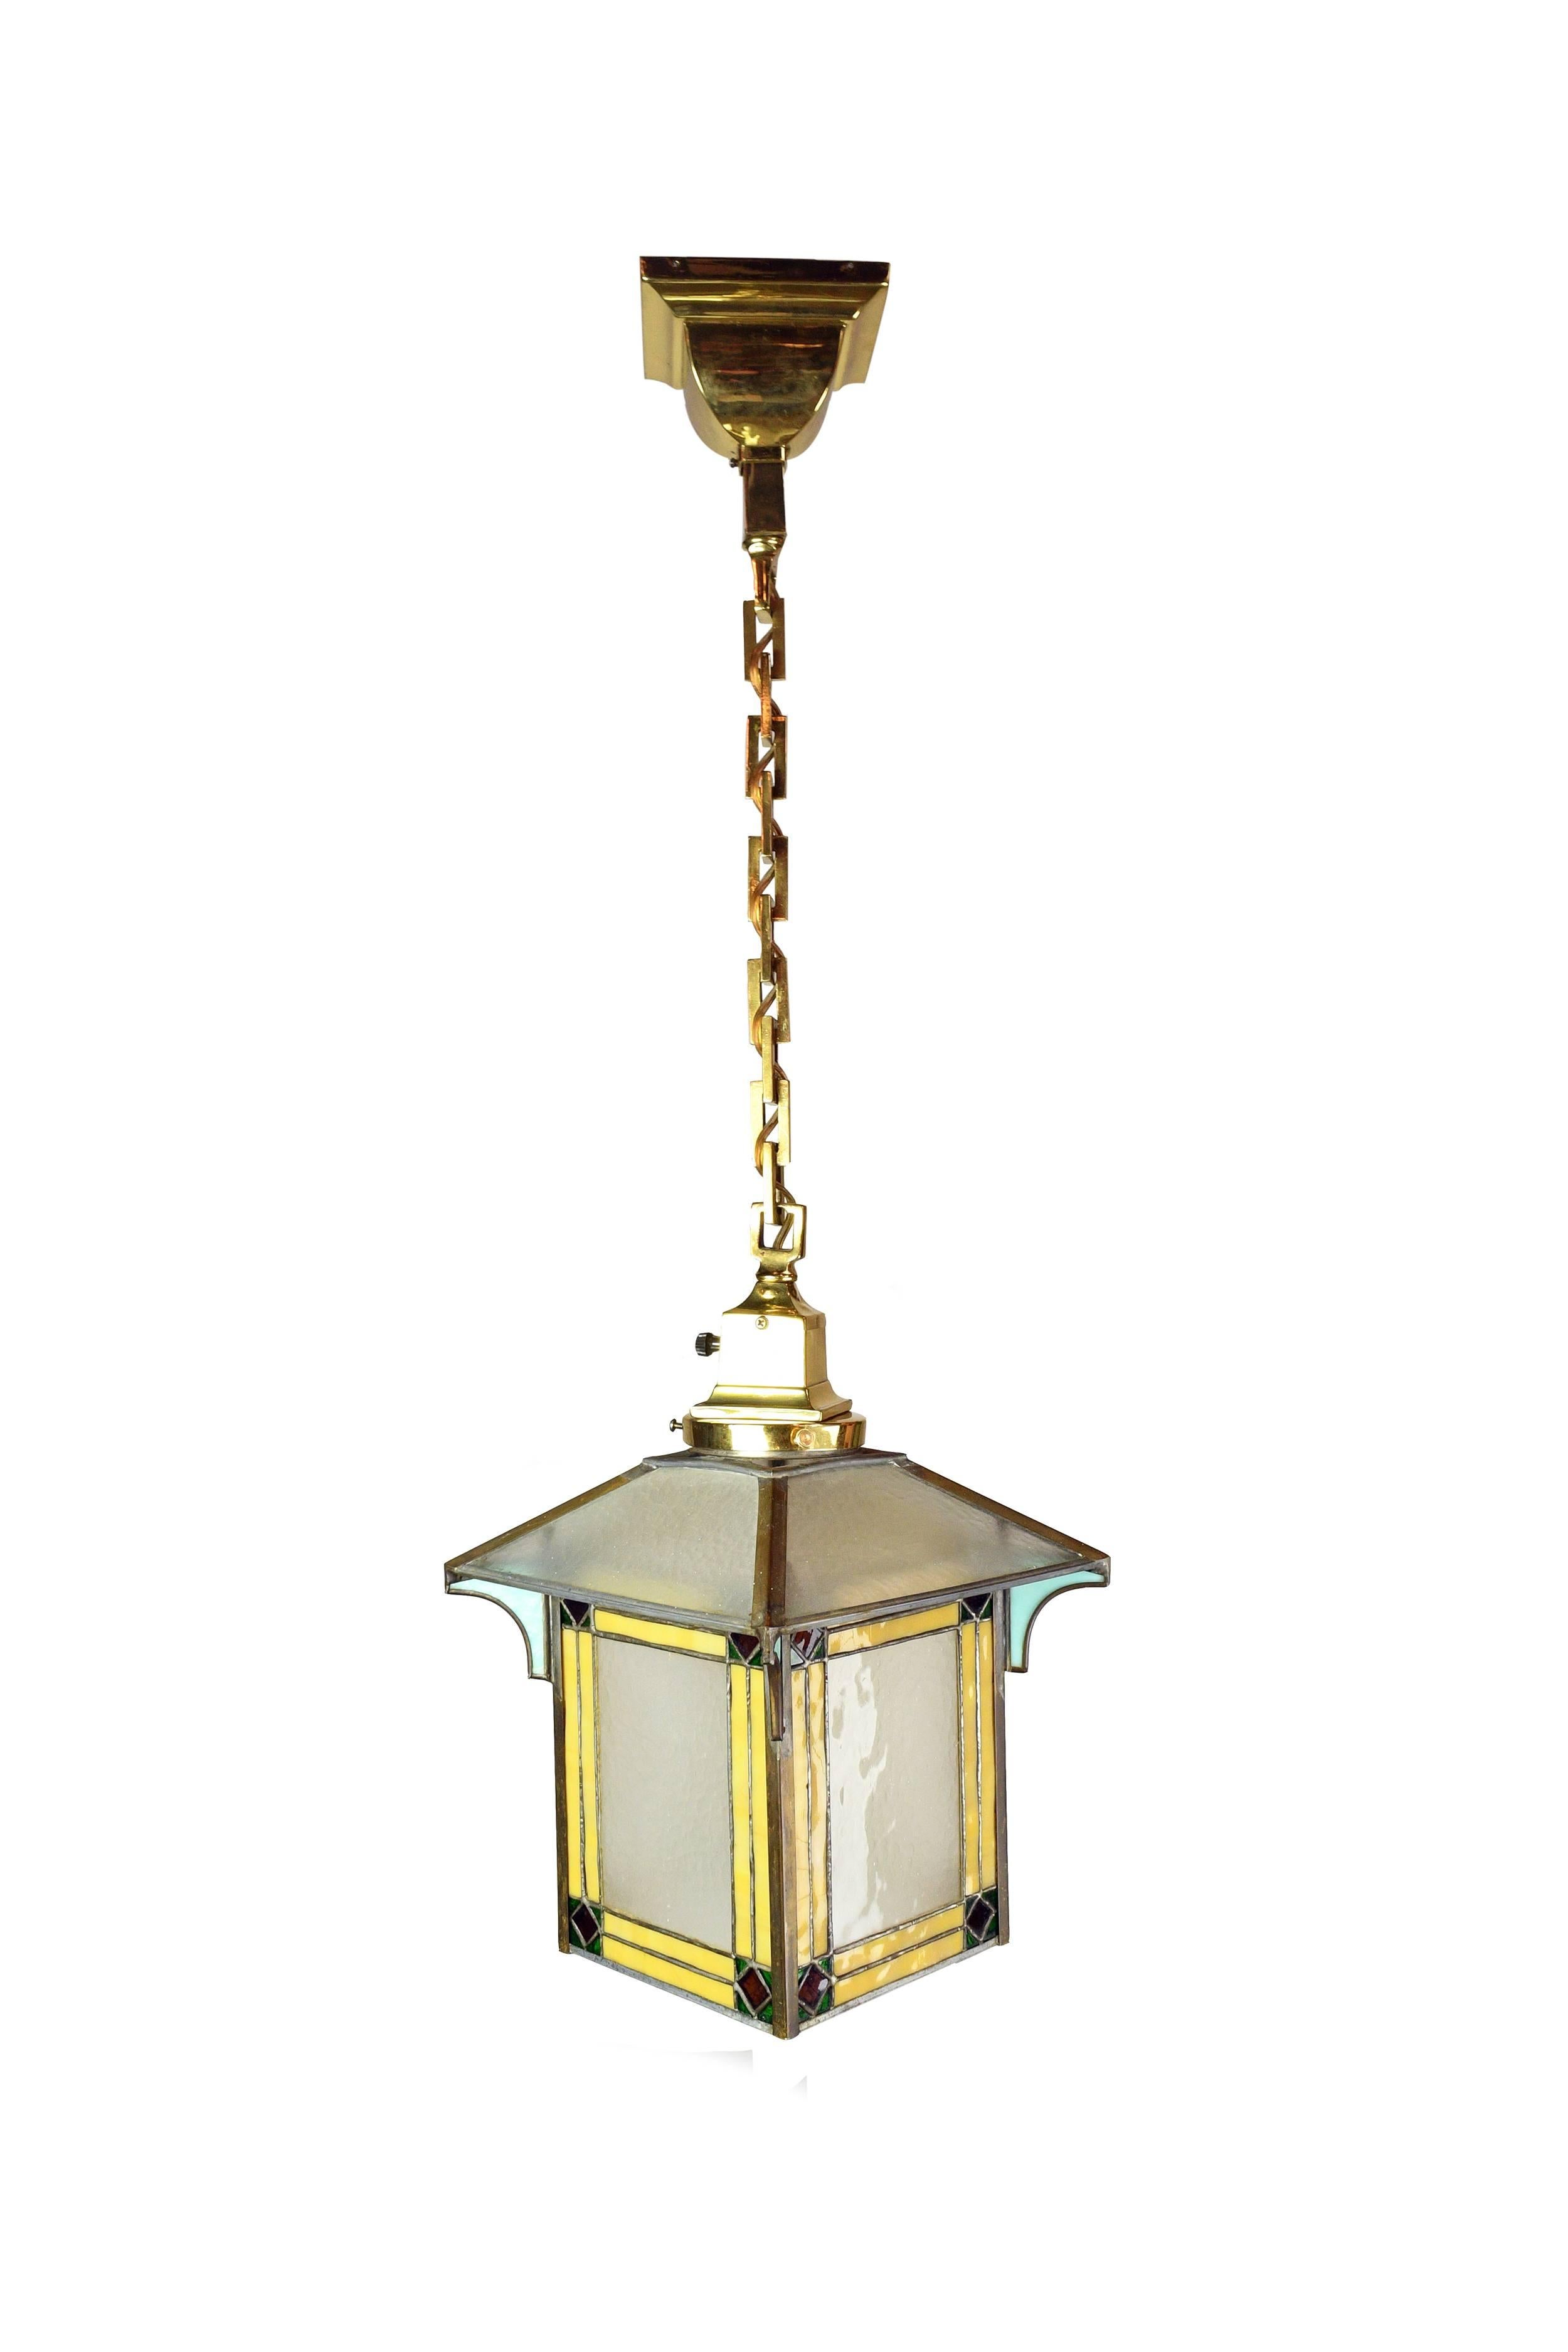 An adorable slag pendant, the shade of which consists of small pieces of multicolored leaded glass. On each corner of the shade, there is a piece of gorgeous glass that's a very rarely seen soft blue color. The rest of the pendant is polished brass,